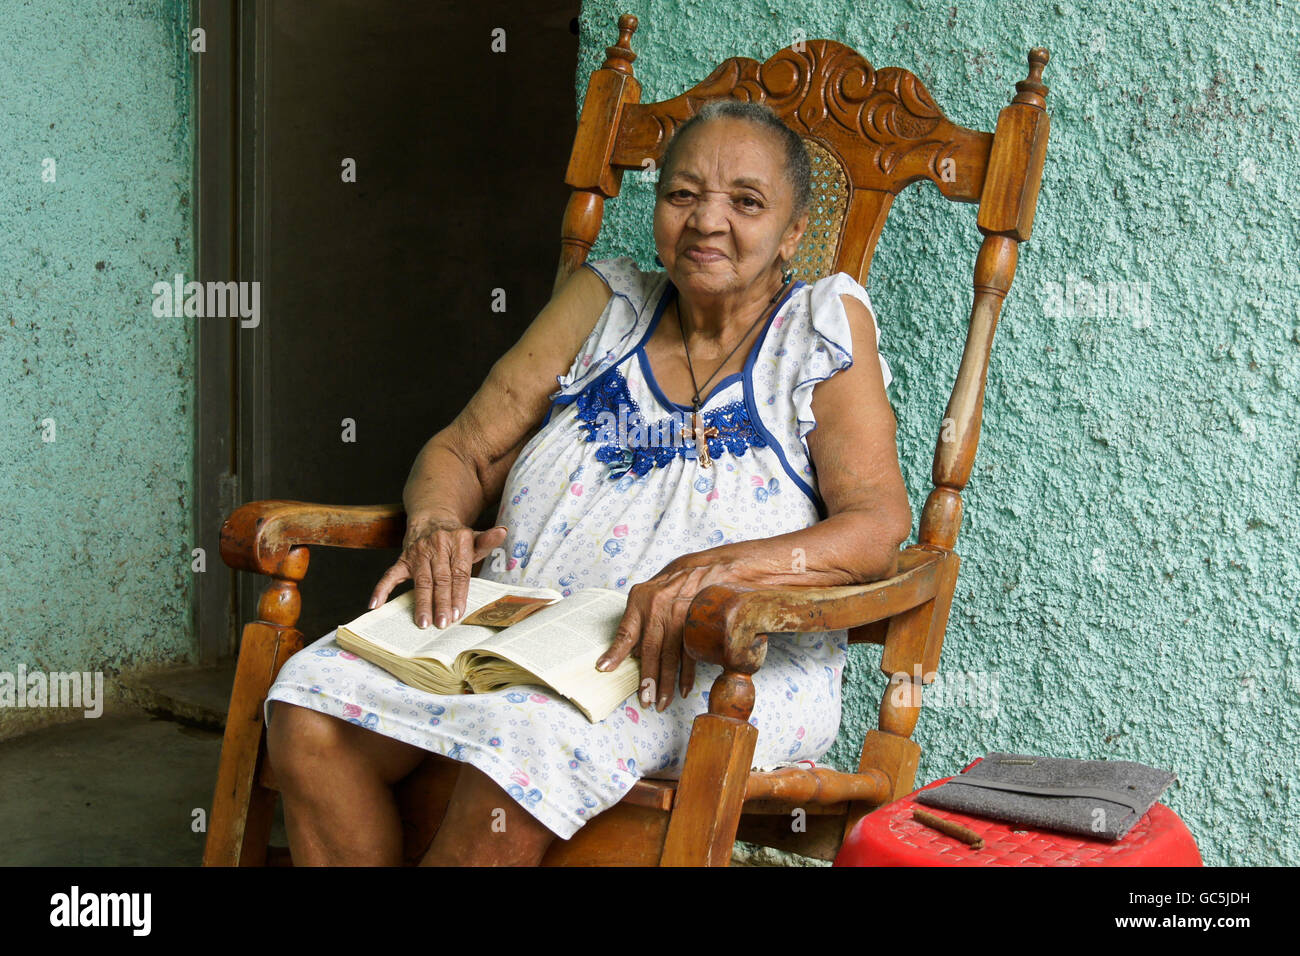 Old Black Lady In Rocking Chair